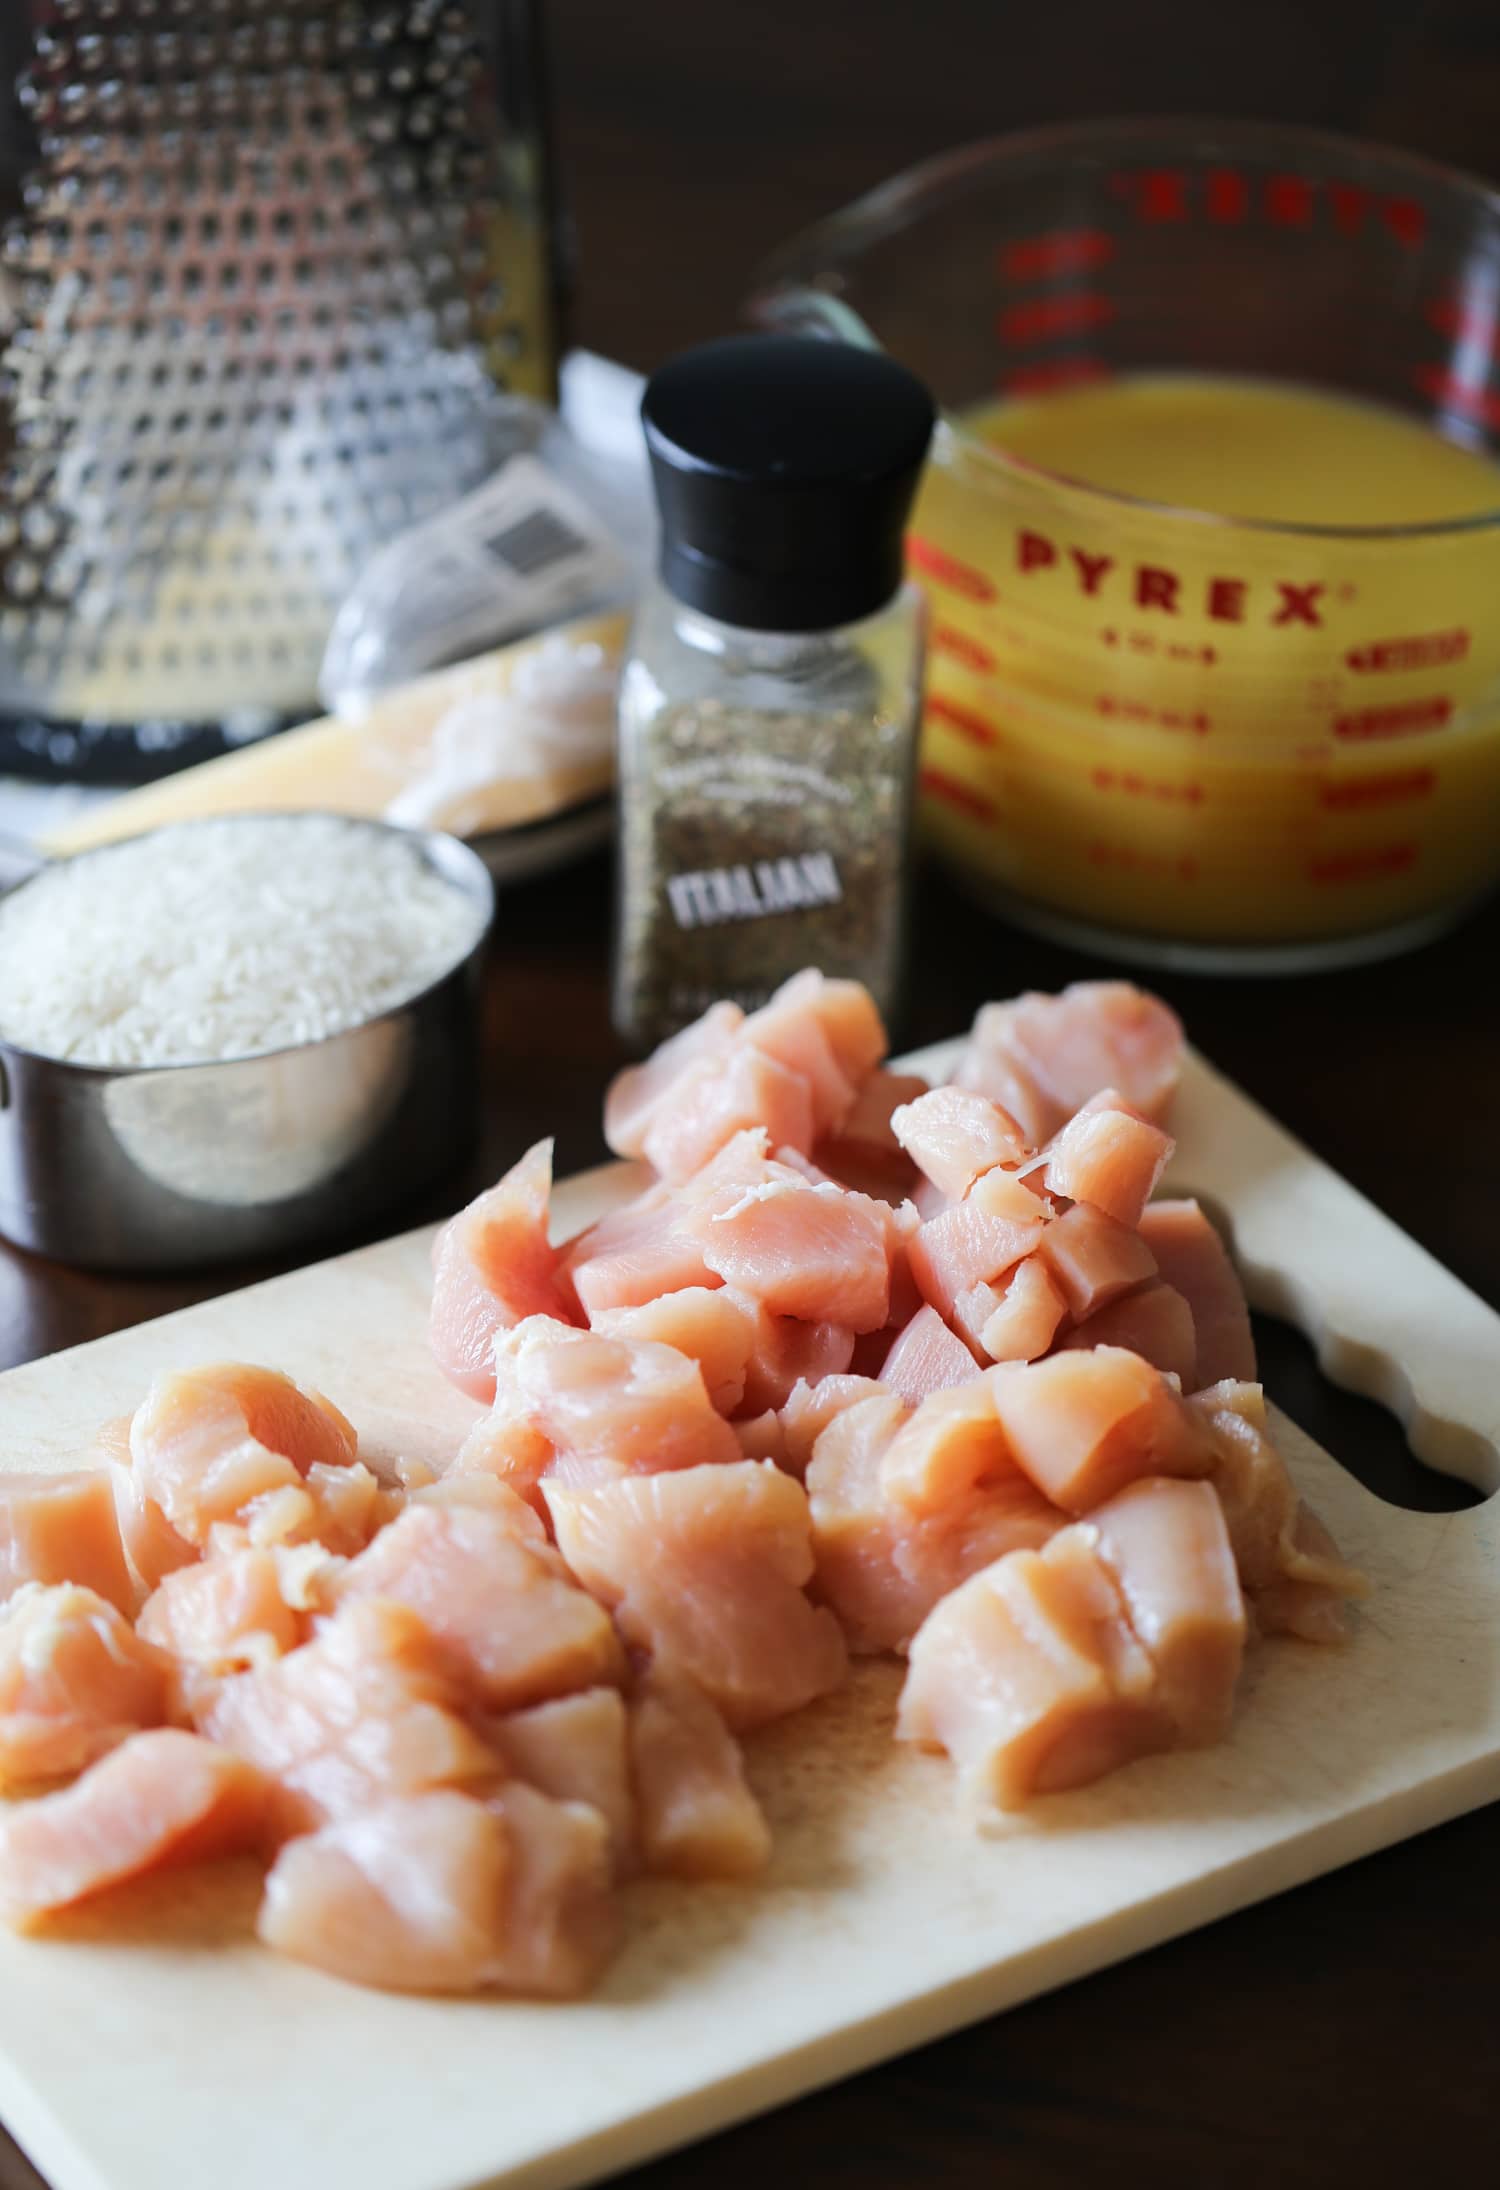 Diced chicken on a cutting board, next to seasoned salt and pepper.